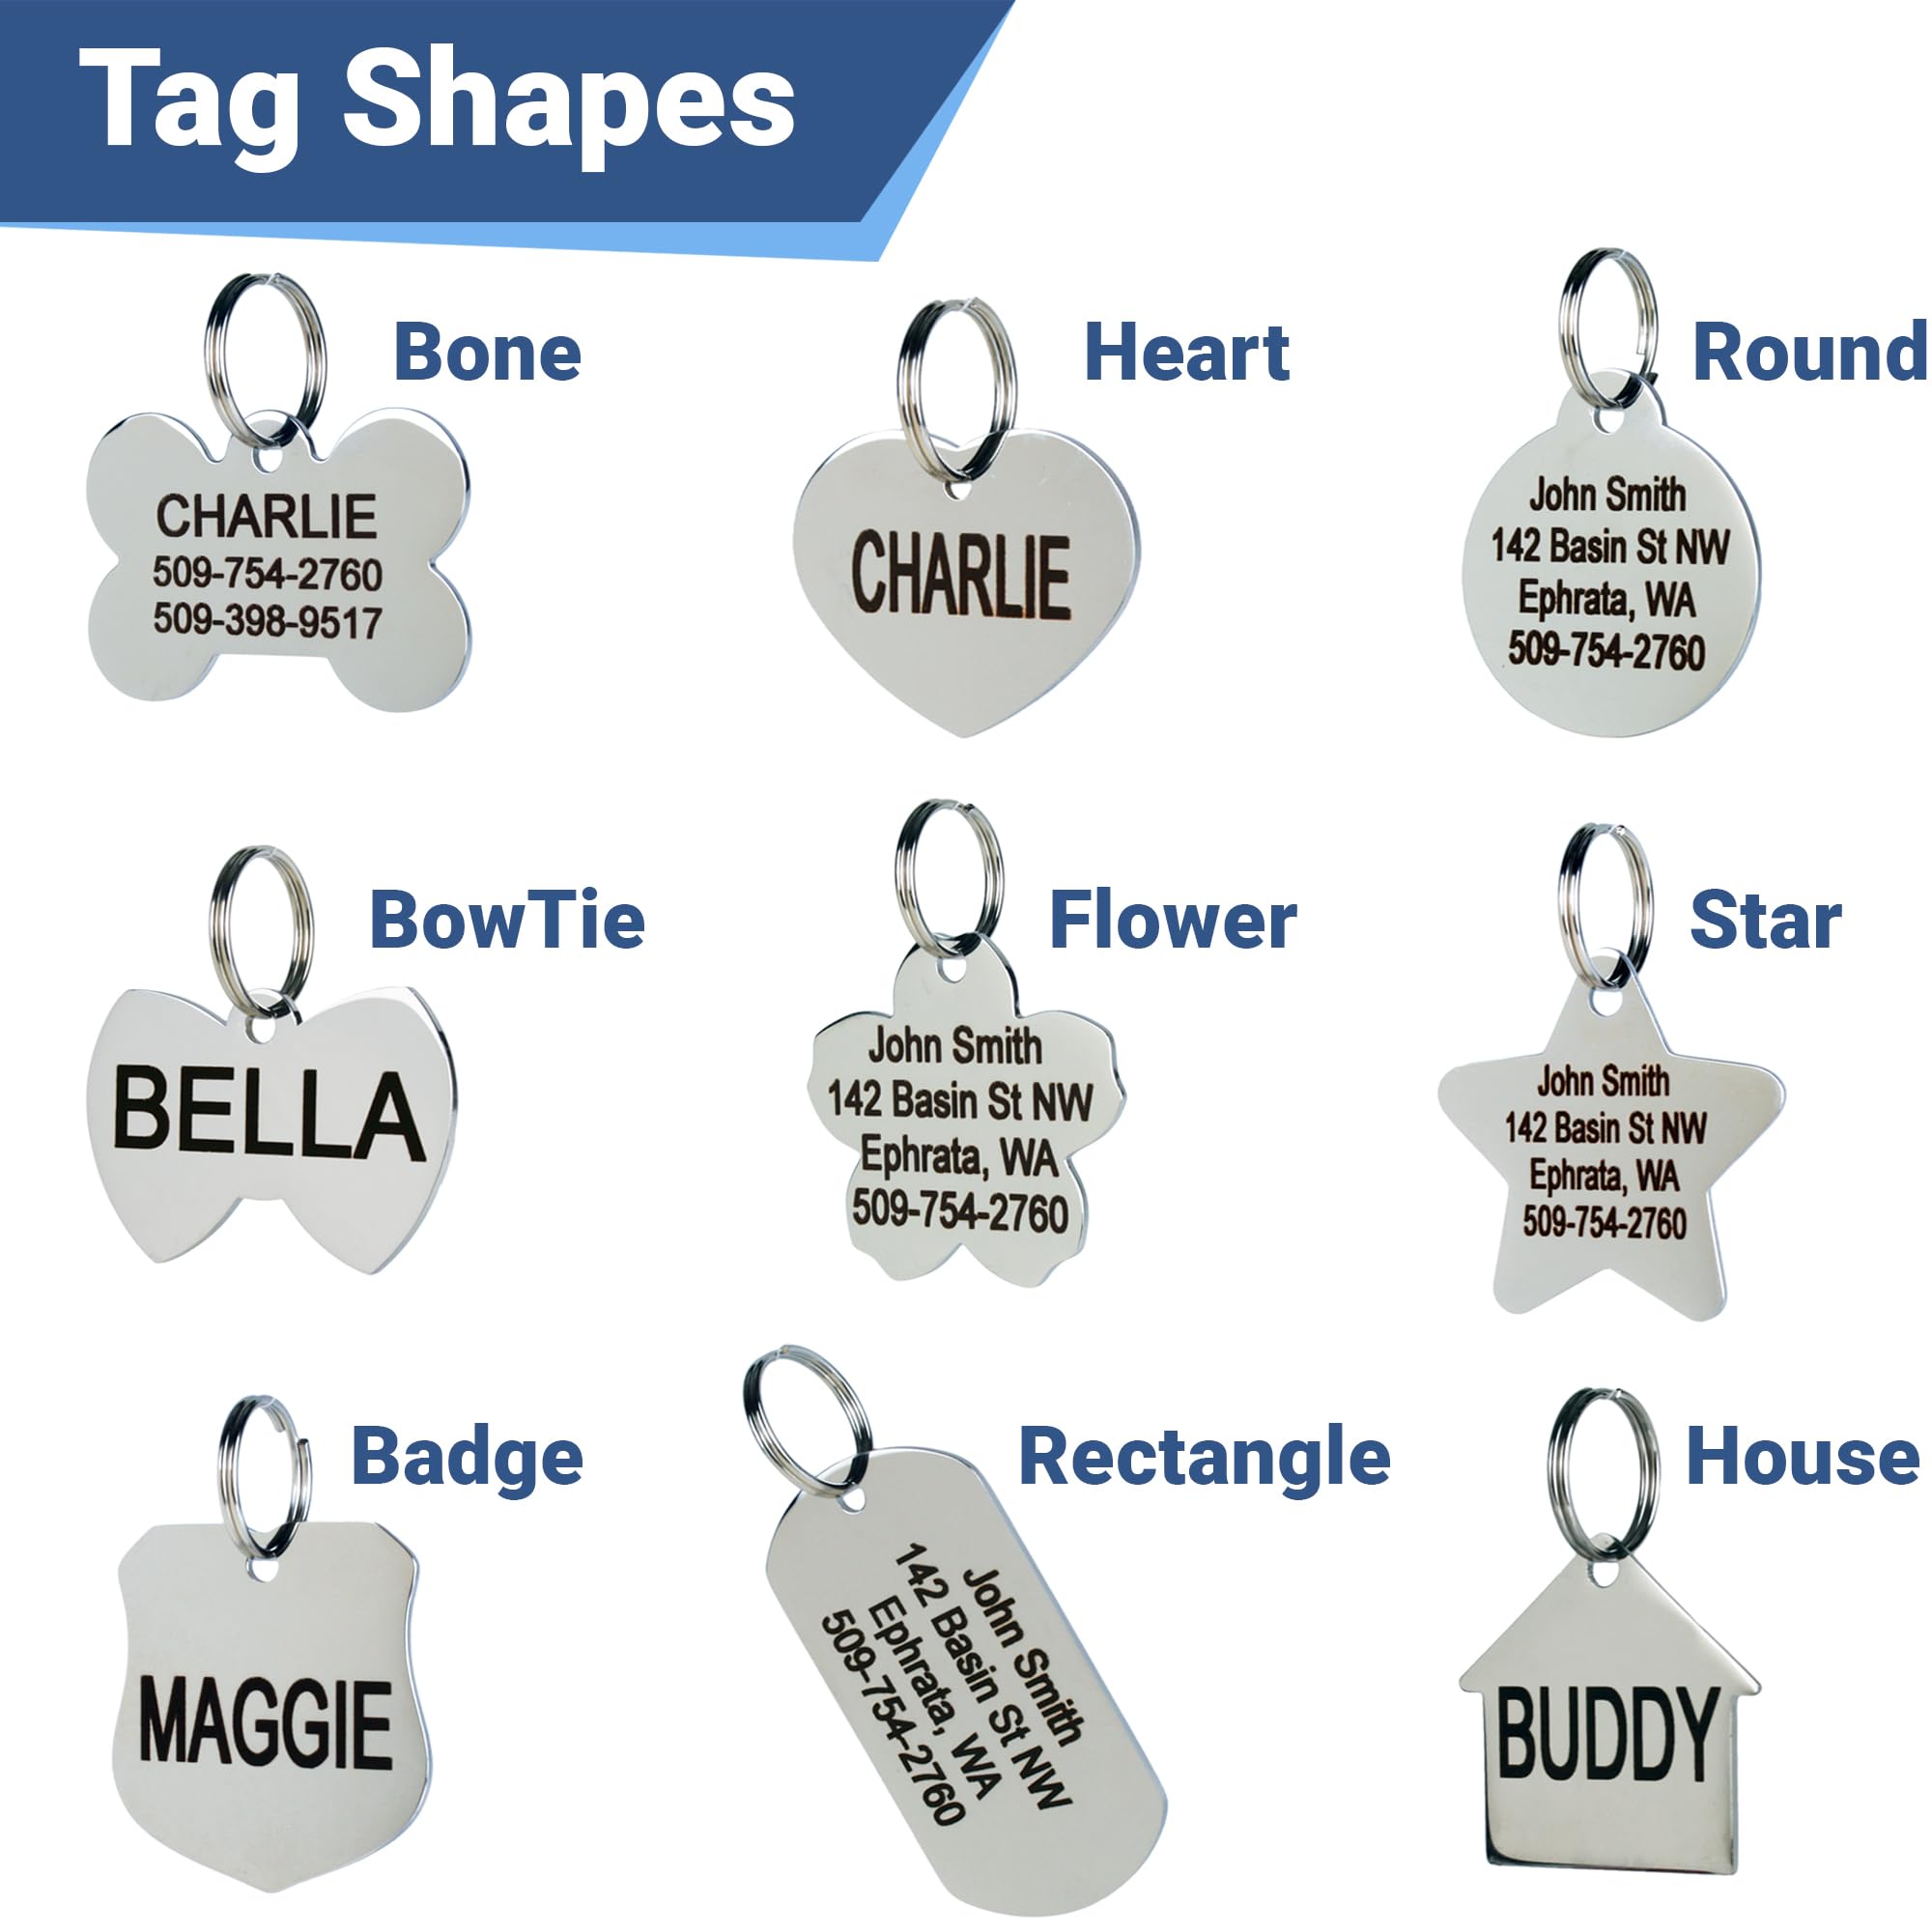 GoTags Stainless Steel Pet ID Tags, Personalized Dog Tags and Cat Tags, up to 8 Lines of Custom Text, Engraved on Both Sides, in Bone, Round, Heart, Bowtie and More (Star, Regular (Pack of 1))